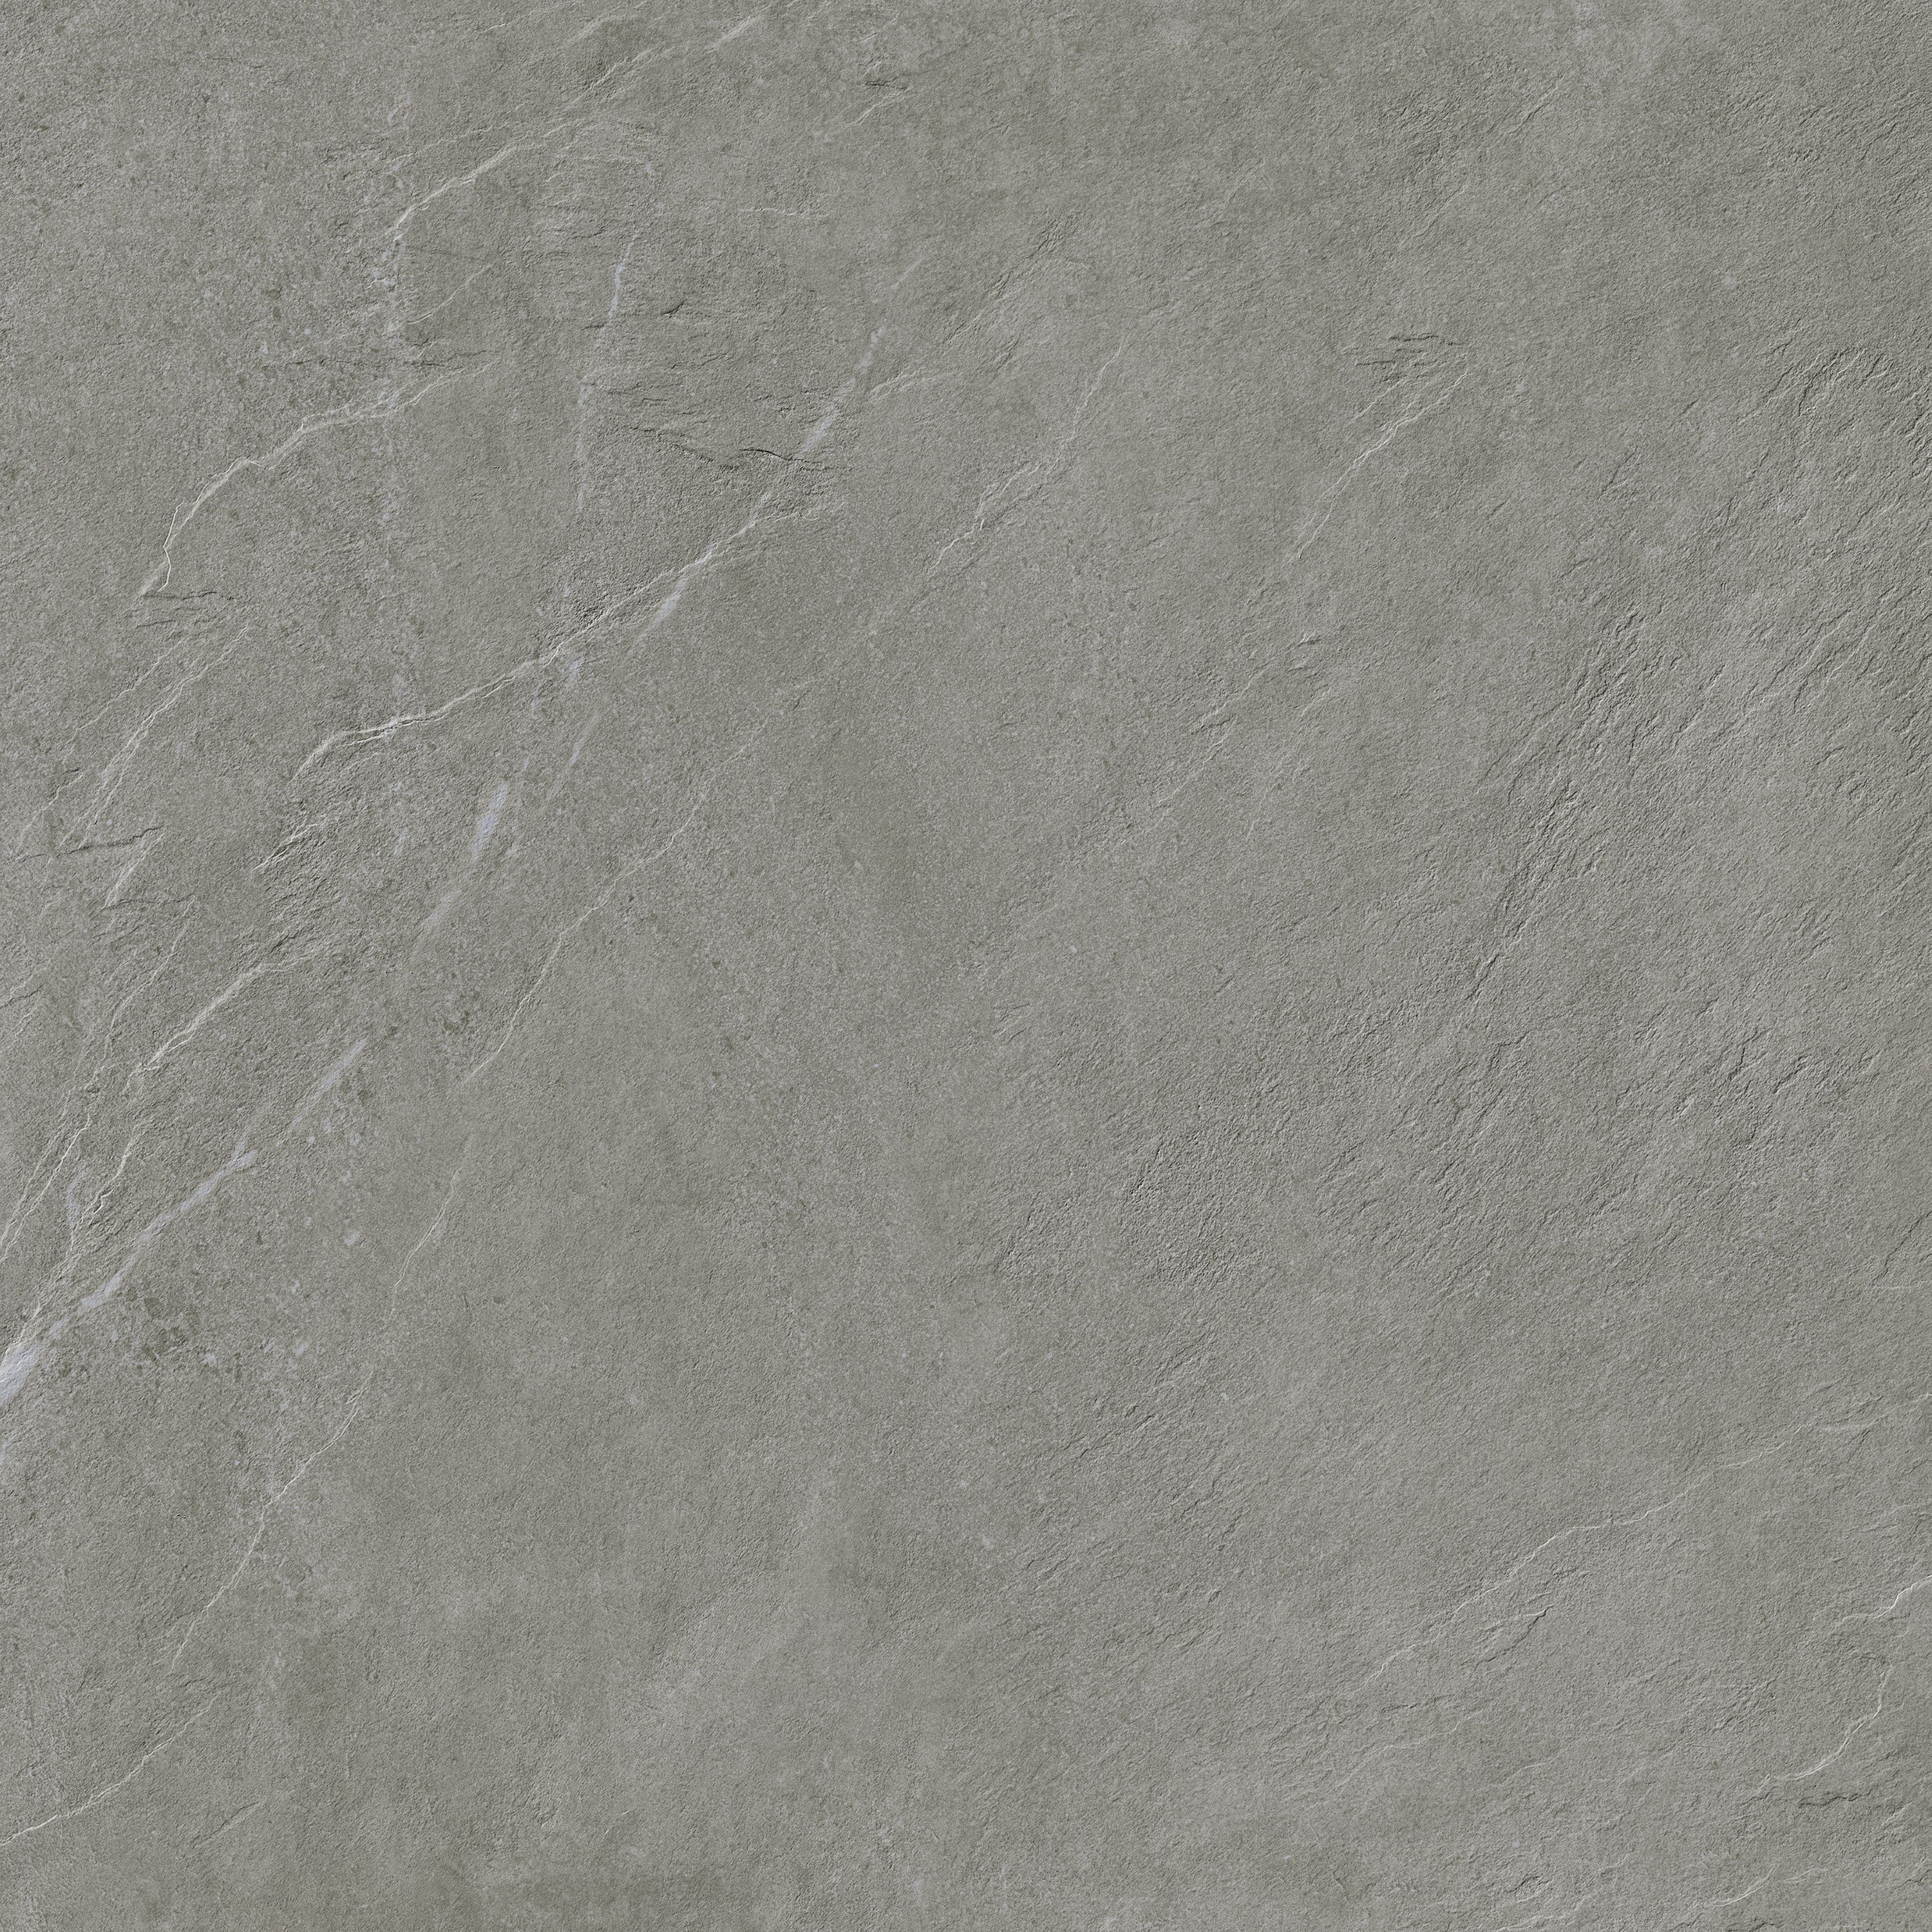 FRONTIER20: Sedimentary Modern Grey Paver Tile (24"x24"x20-mm | matte | Rectified)